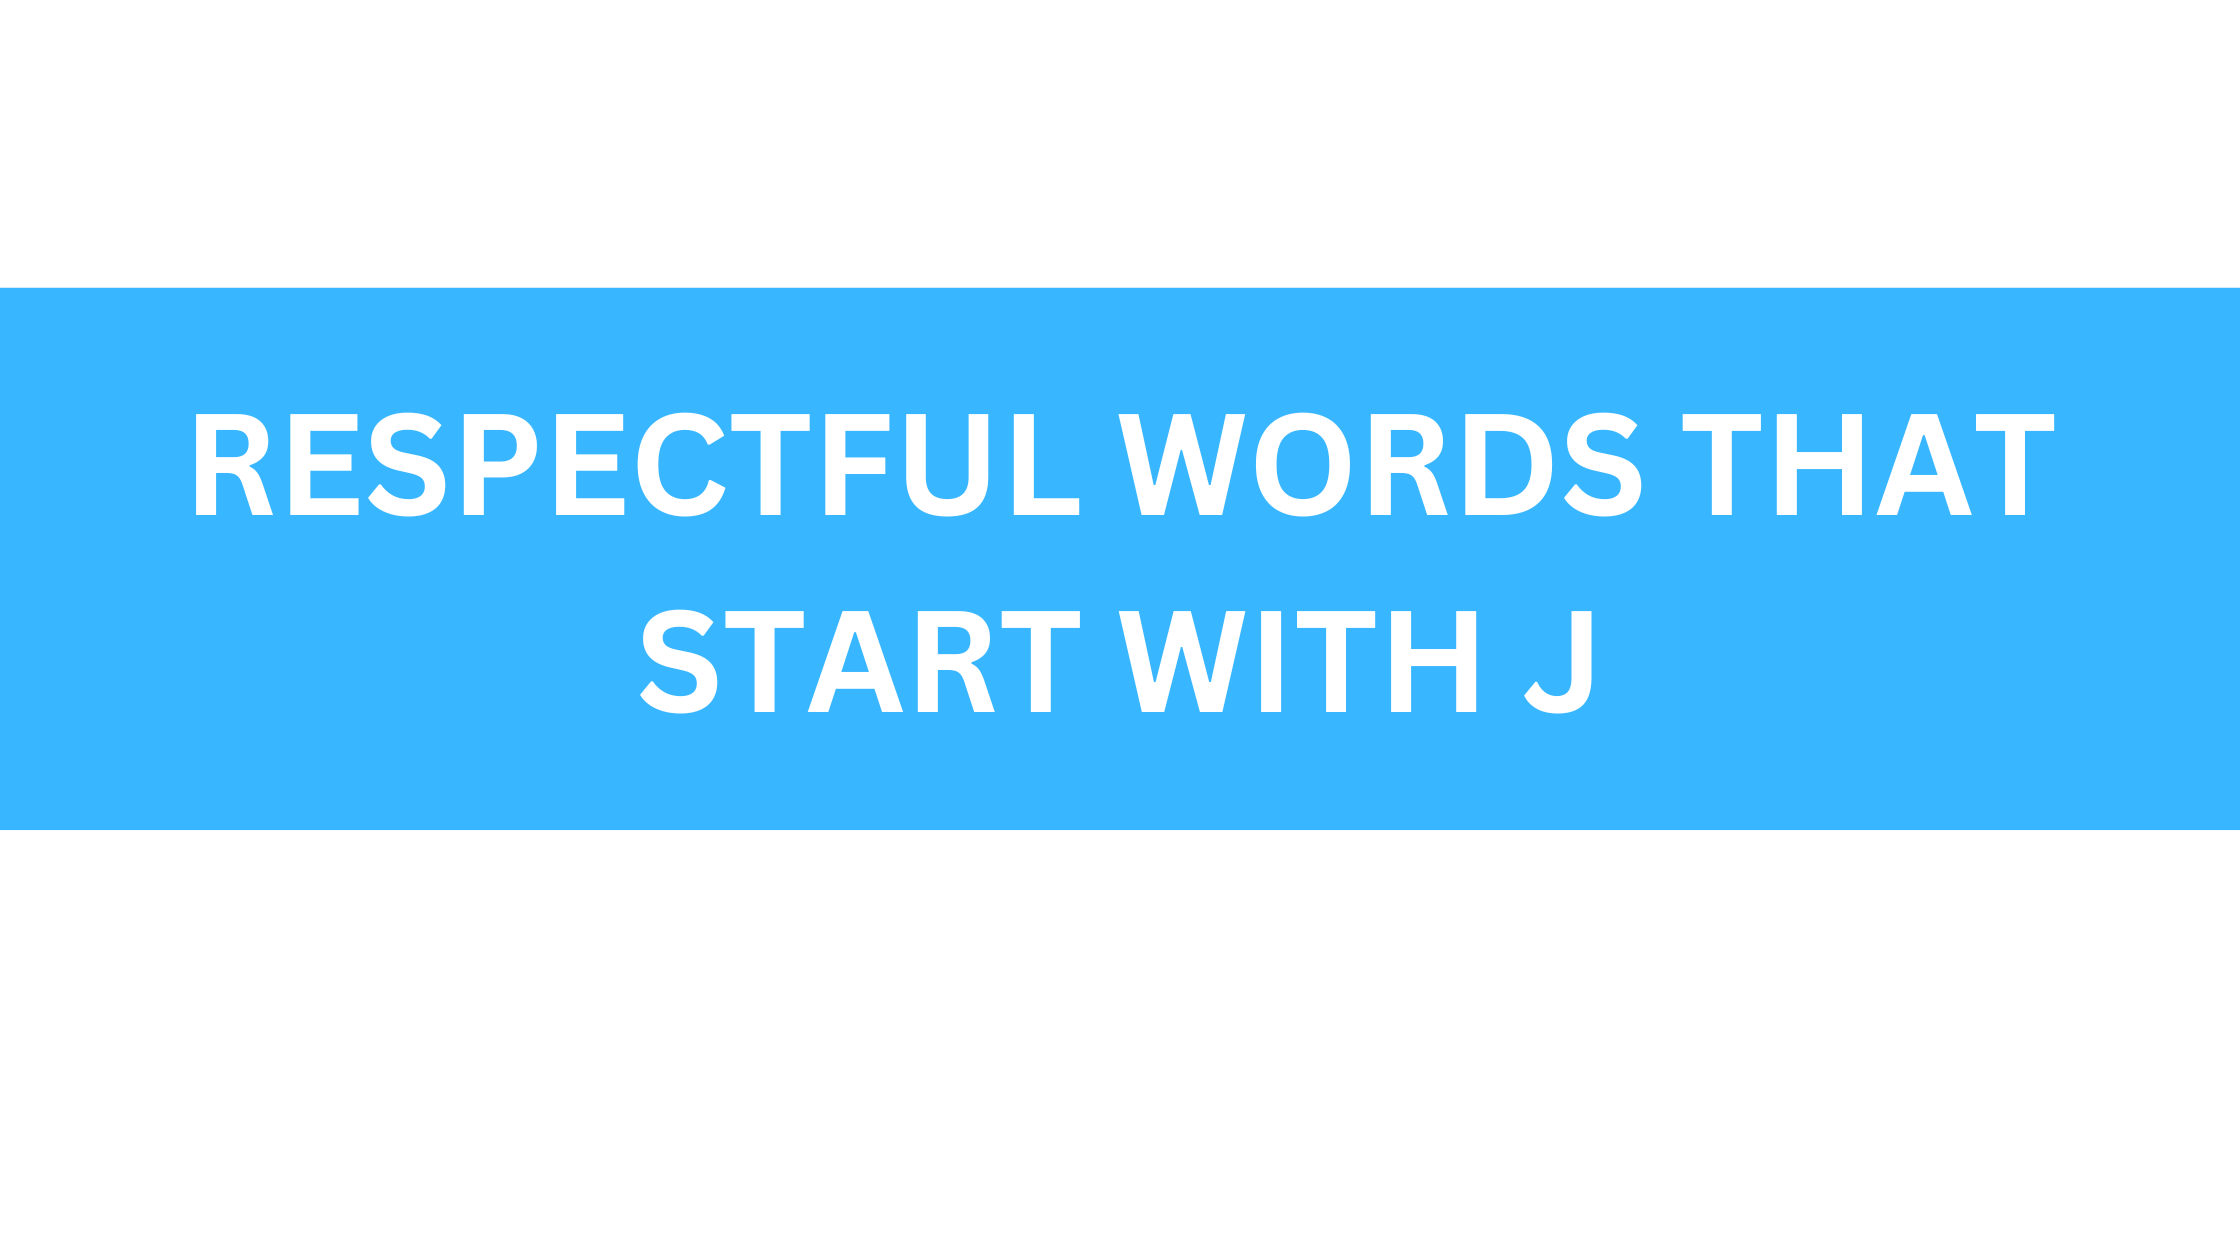 respectful words that start with j